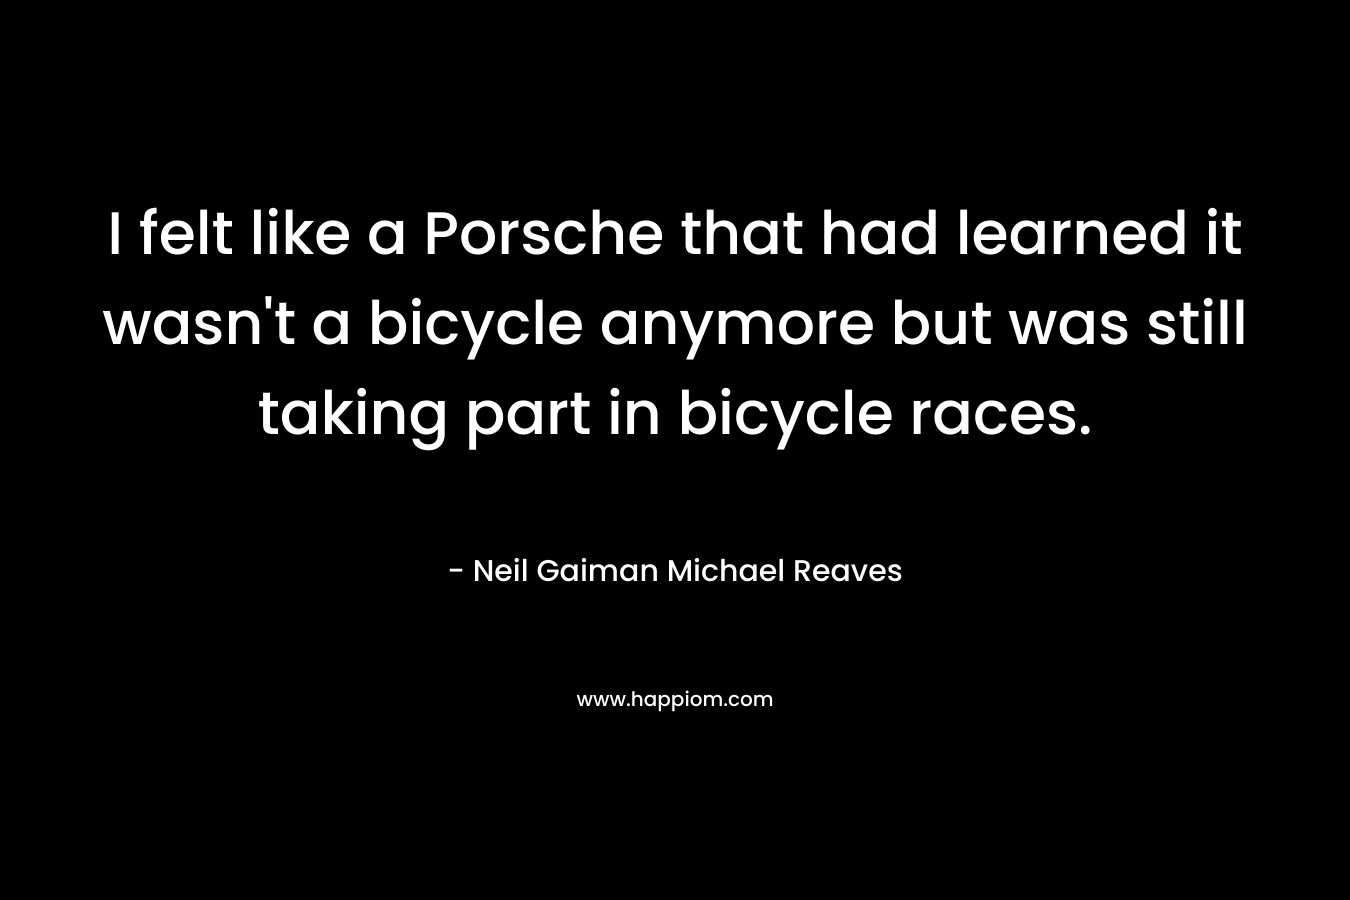 I felt like a Porsche that had learned it wasn't a bicycle anymore but was still taking part in bicycle races.